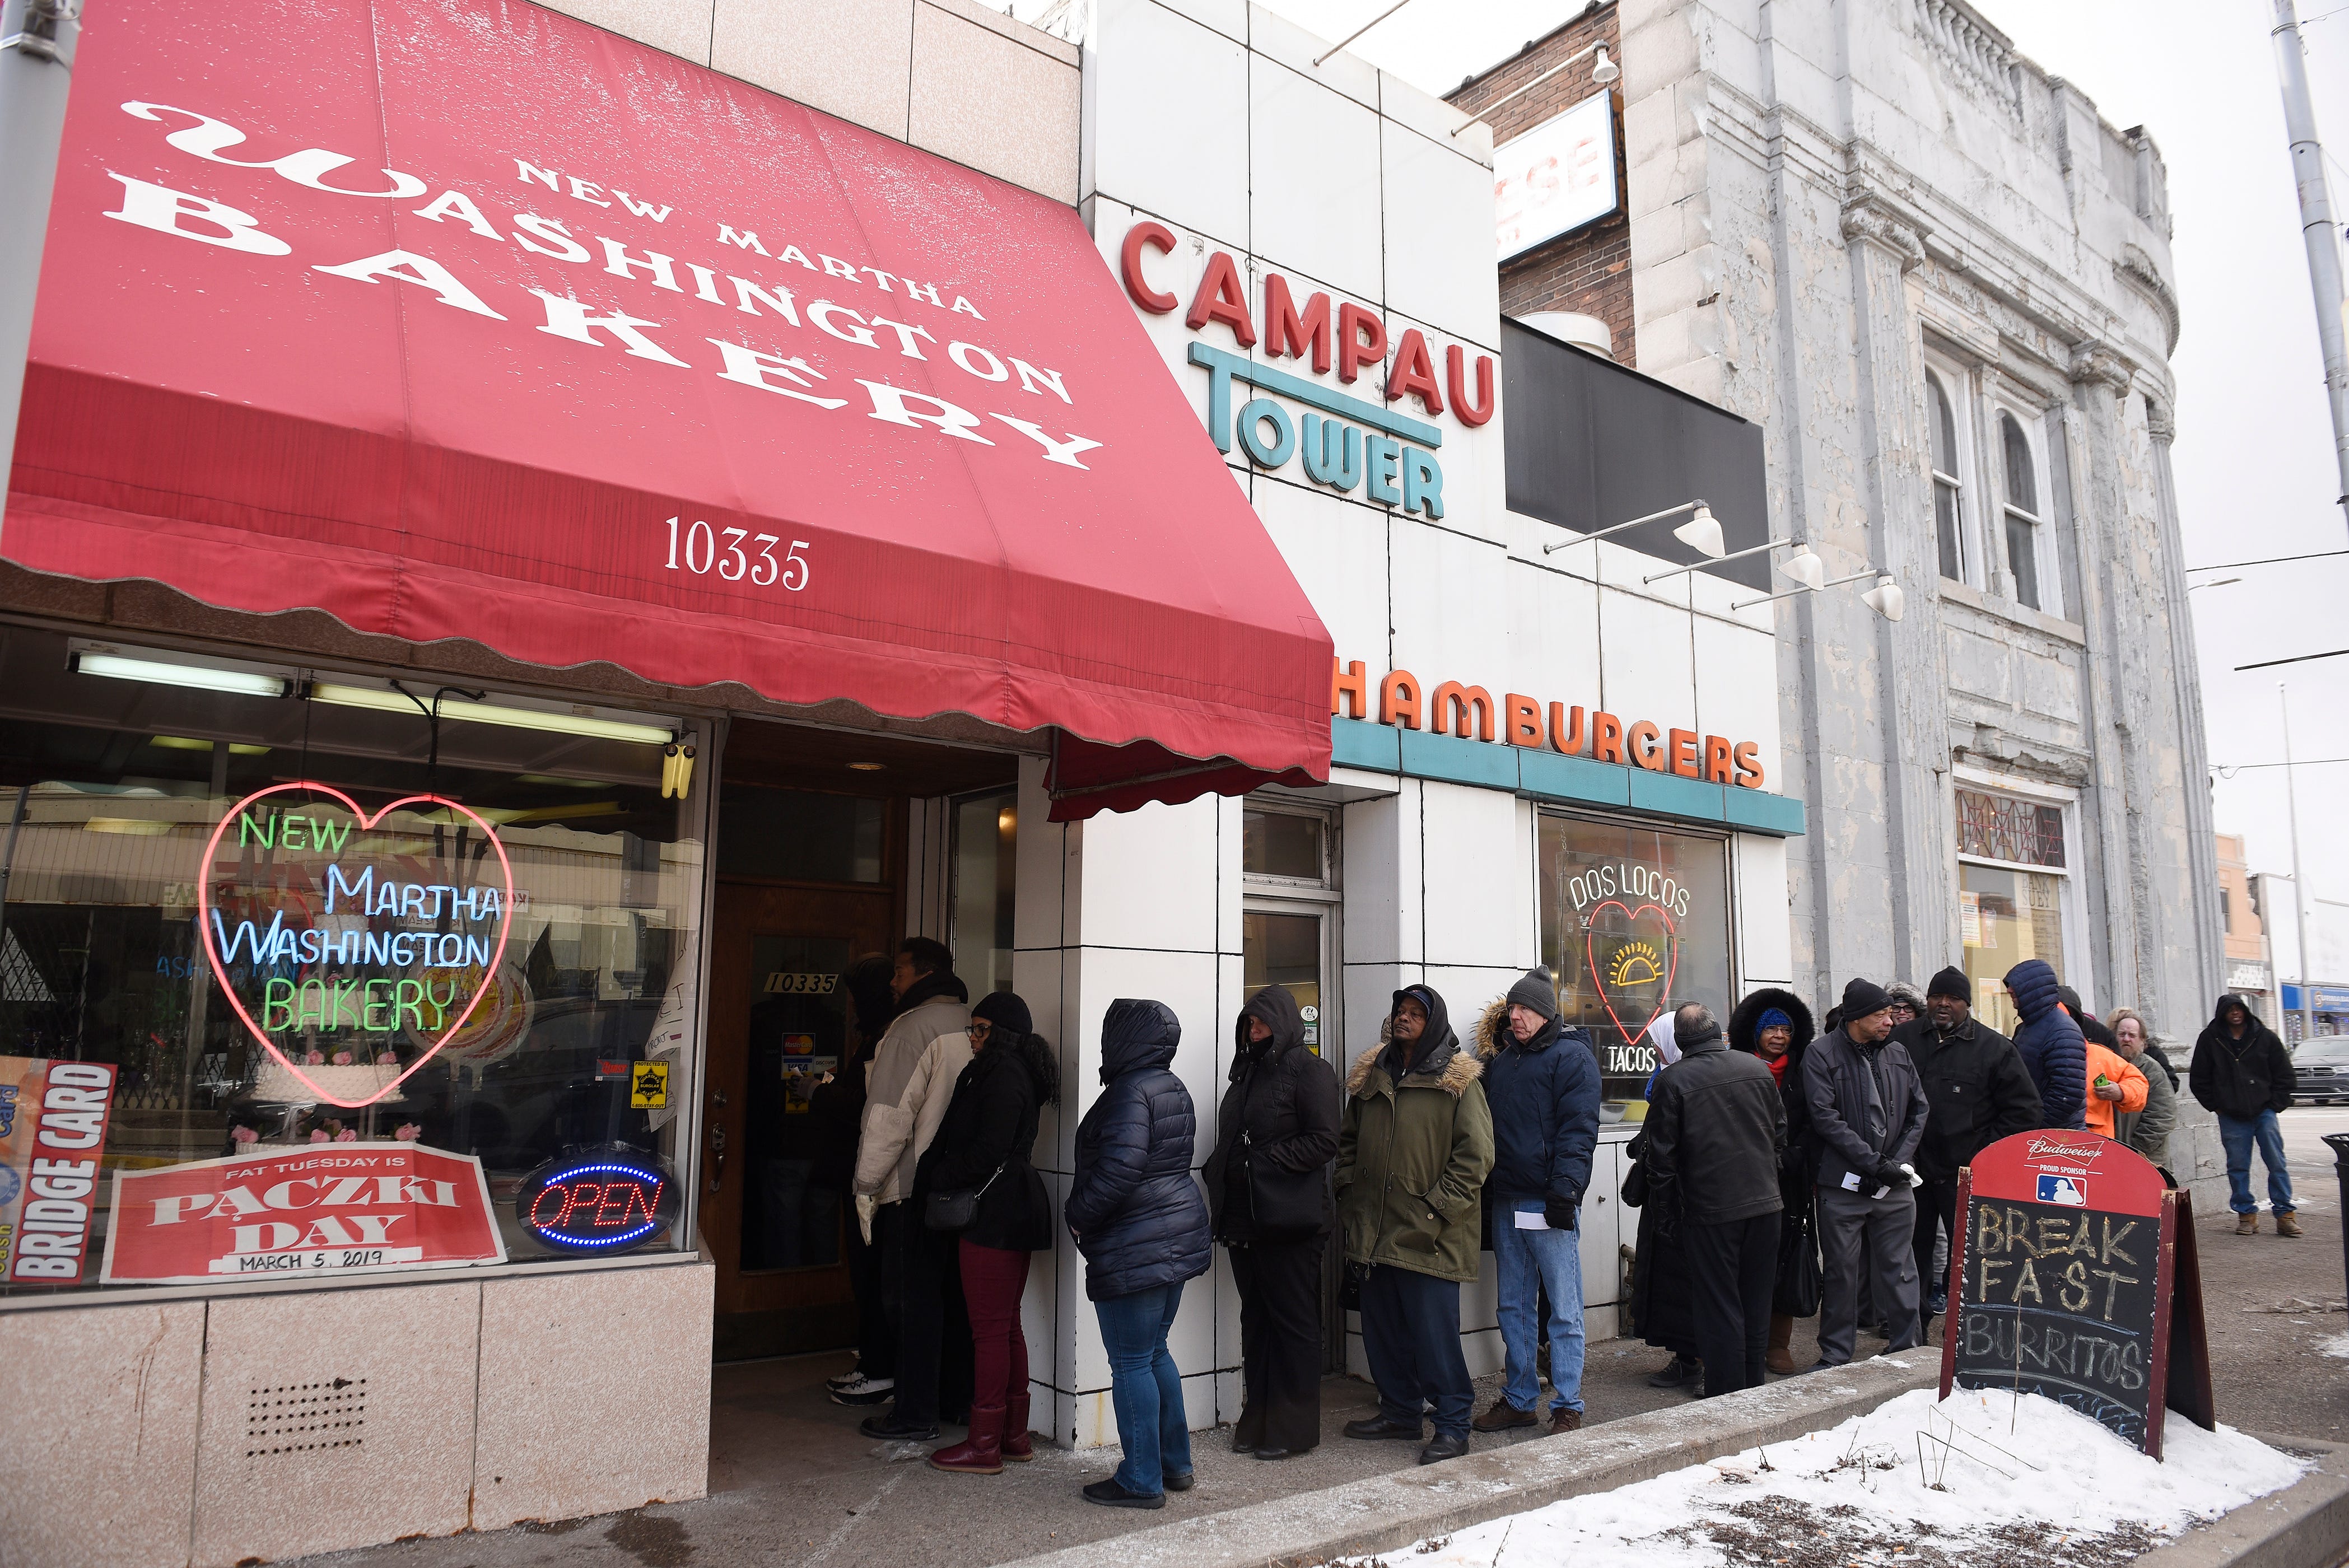 A long line of customers wait to enter the New Martha Washington Bakery to purchase their paczki.